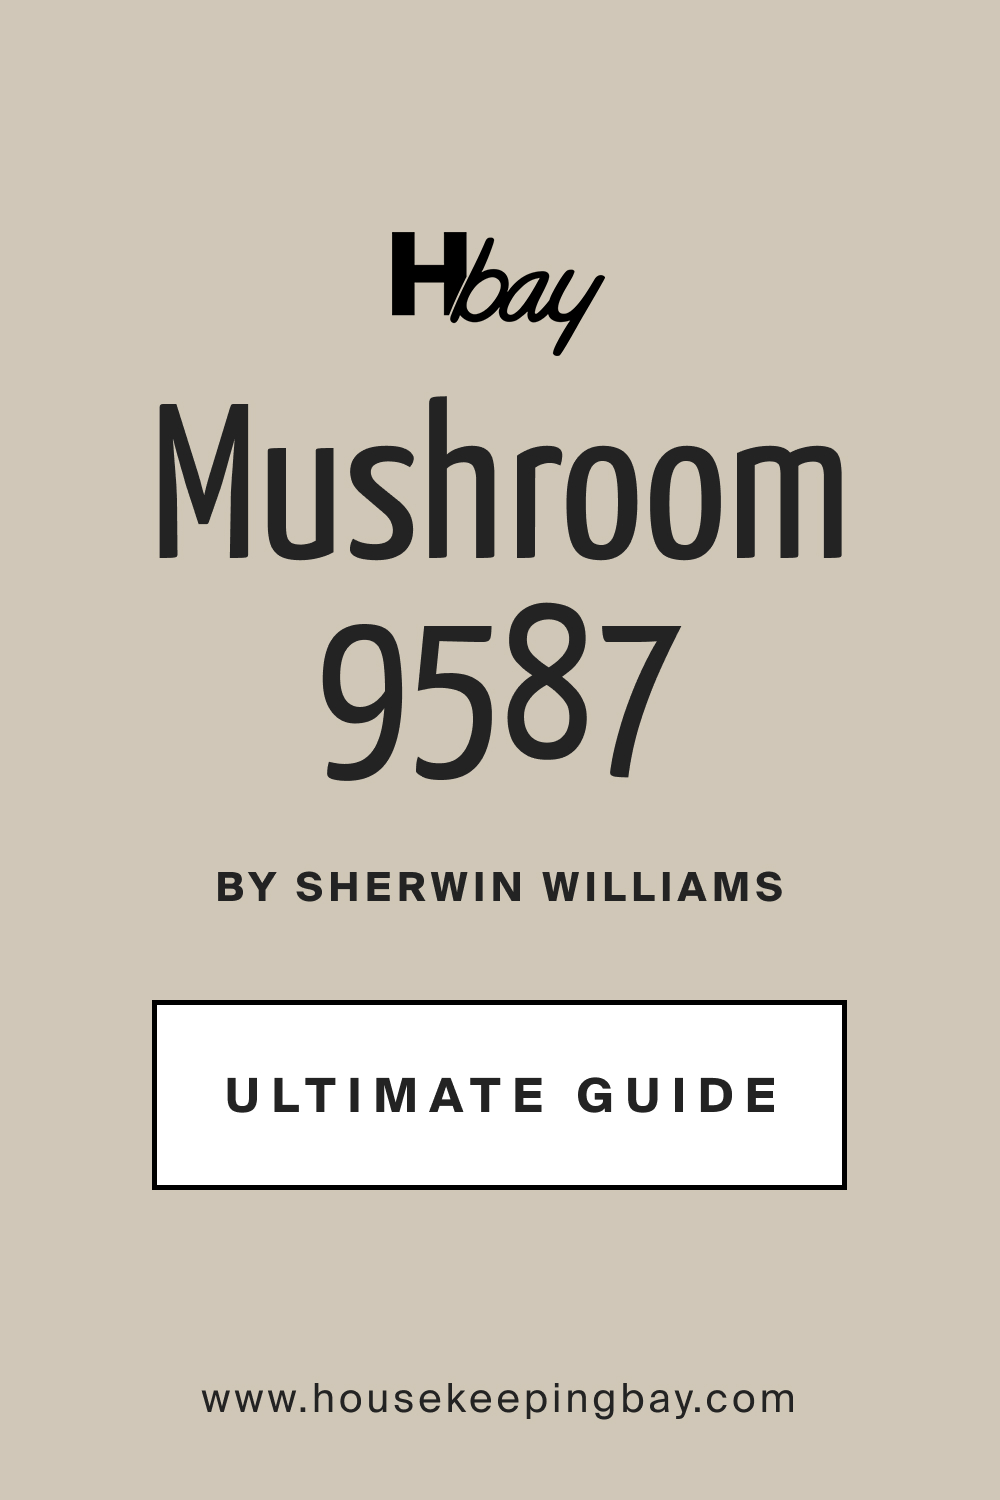 SW 9587 Mushroom by Sherwin Williams Ultimate Guide